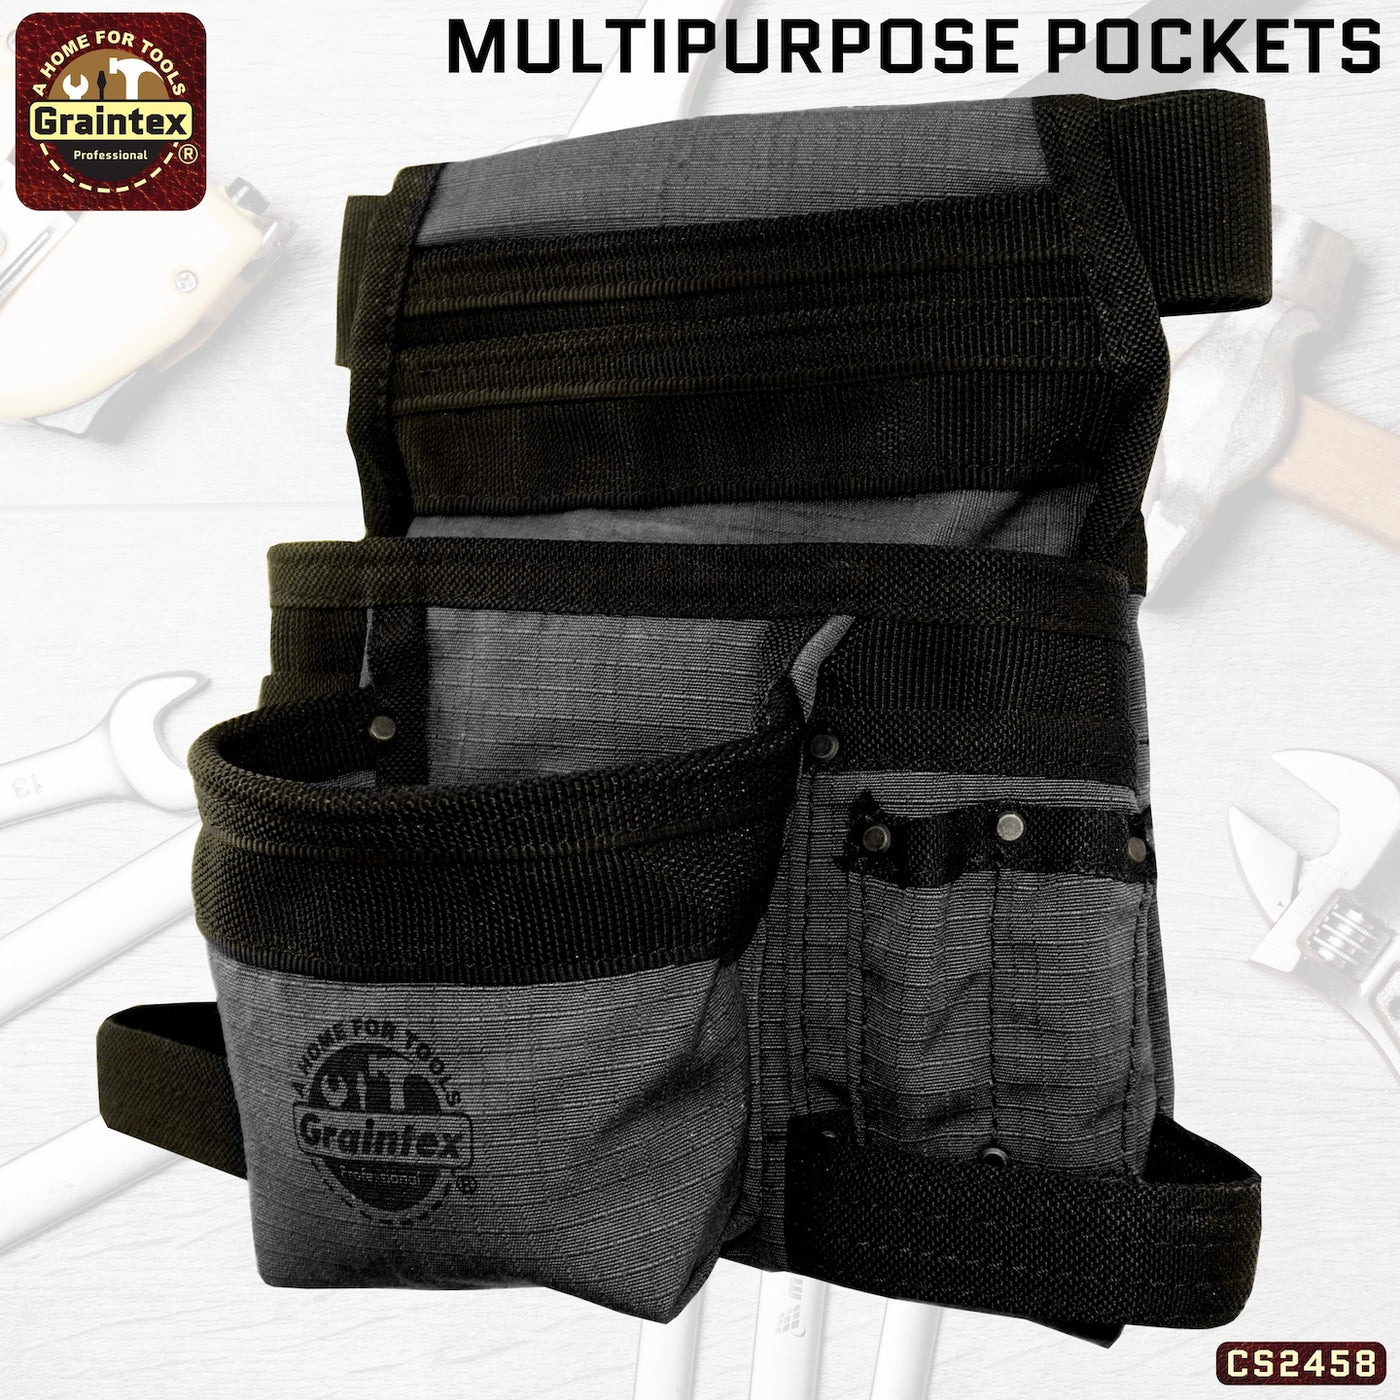 CS2458 :: 10 Pocket Finisher Nail & Tool Pouch Black Color Ripstop Canvas with 2” Webbing Belt